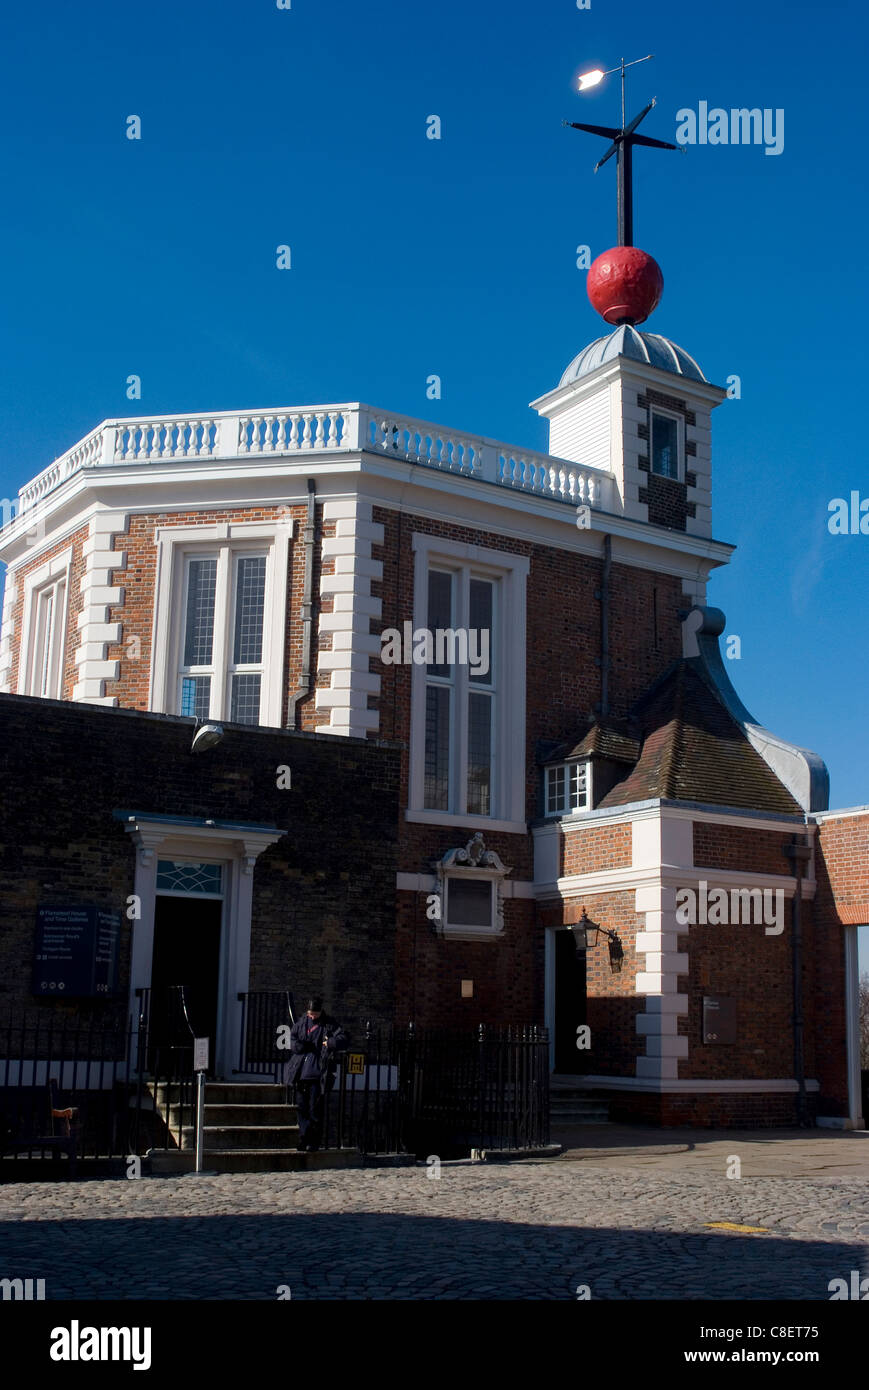 Royal Observatory dating from 1675 and site of the Prime Meridien latitude 00, Greenwich Park, Greenwich, London, England,UK Stock Photo